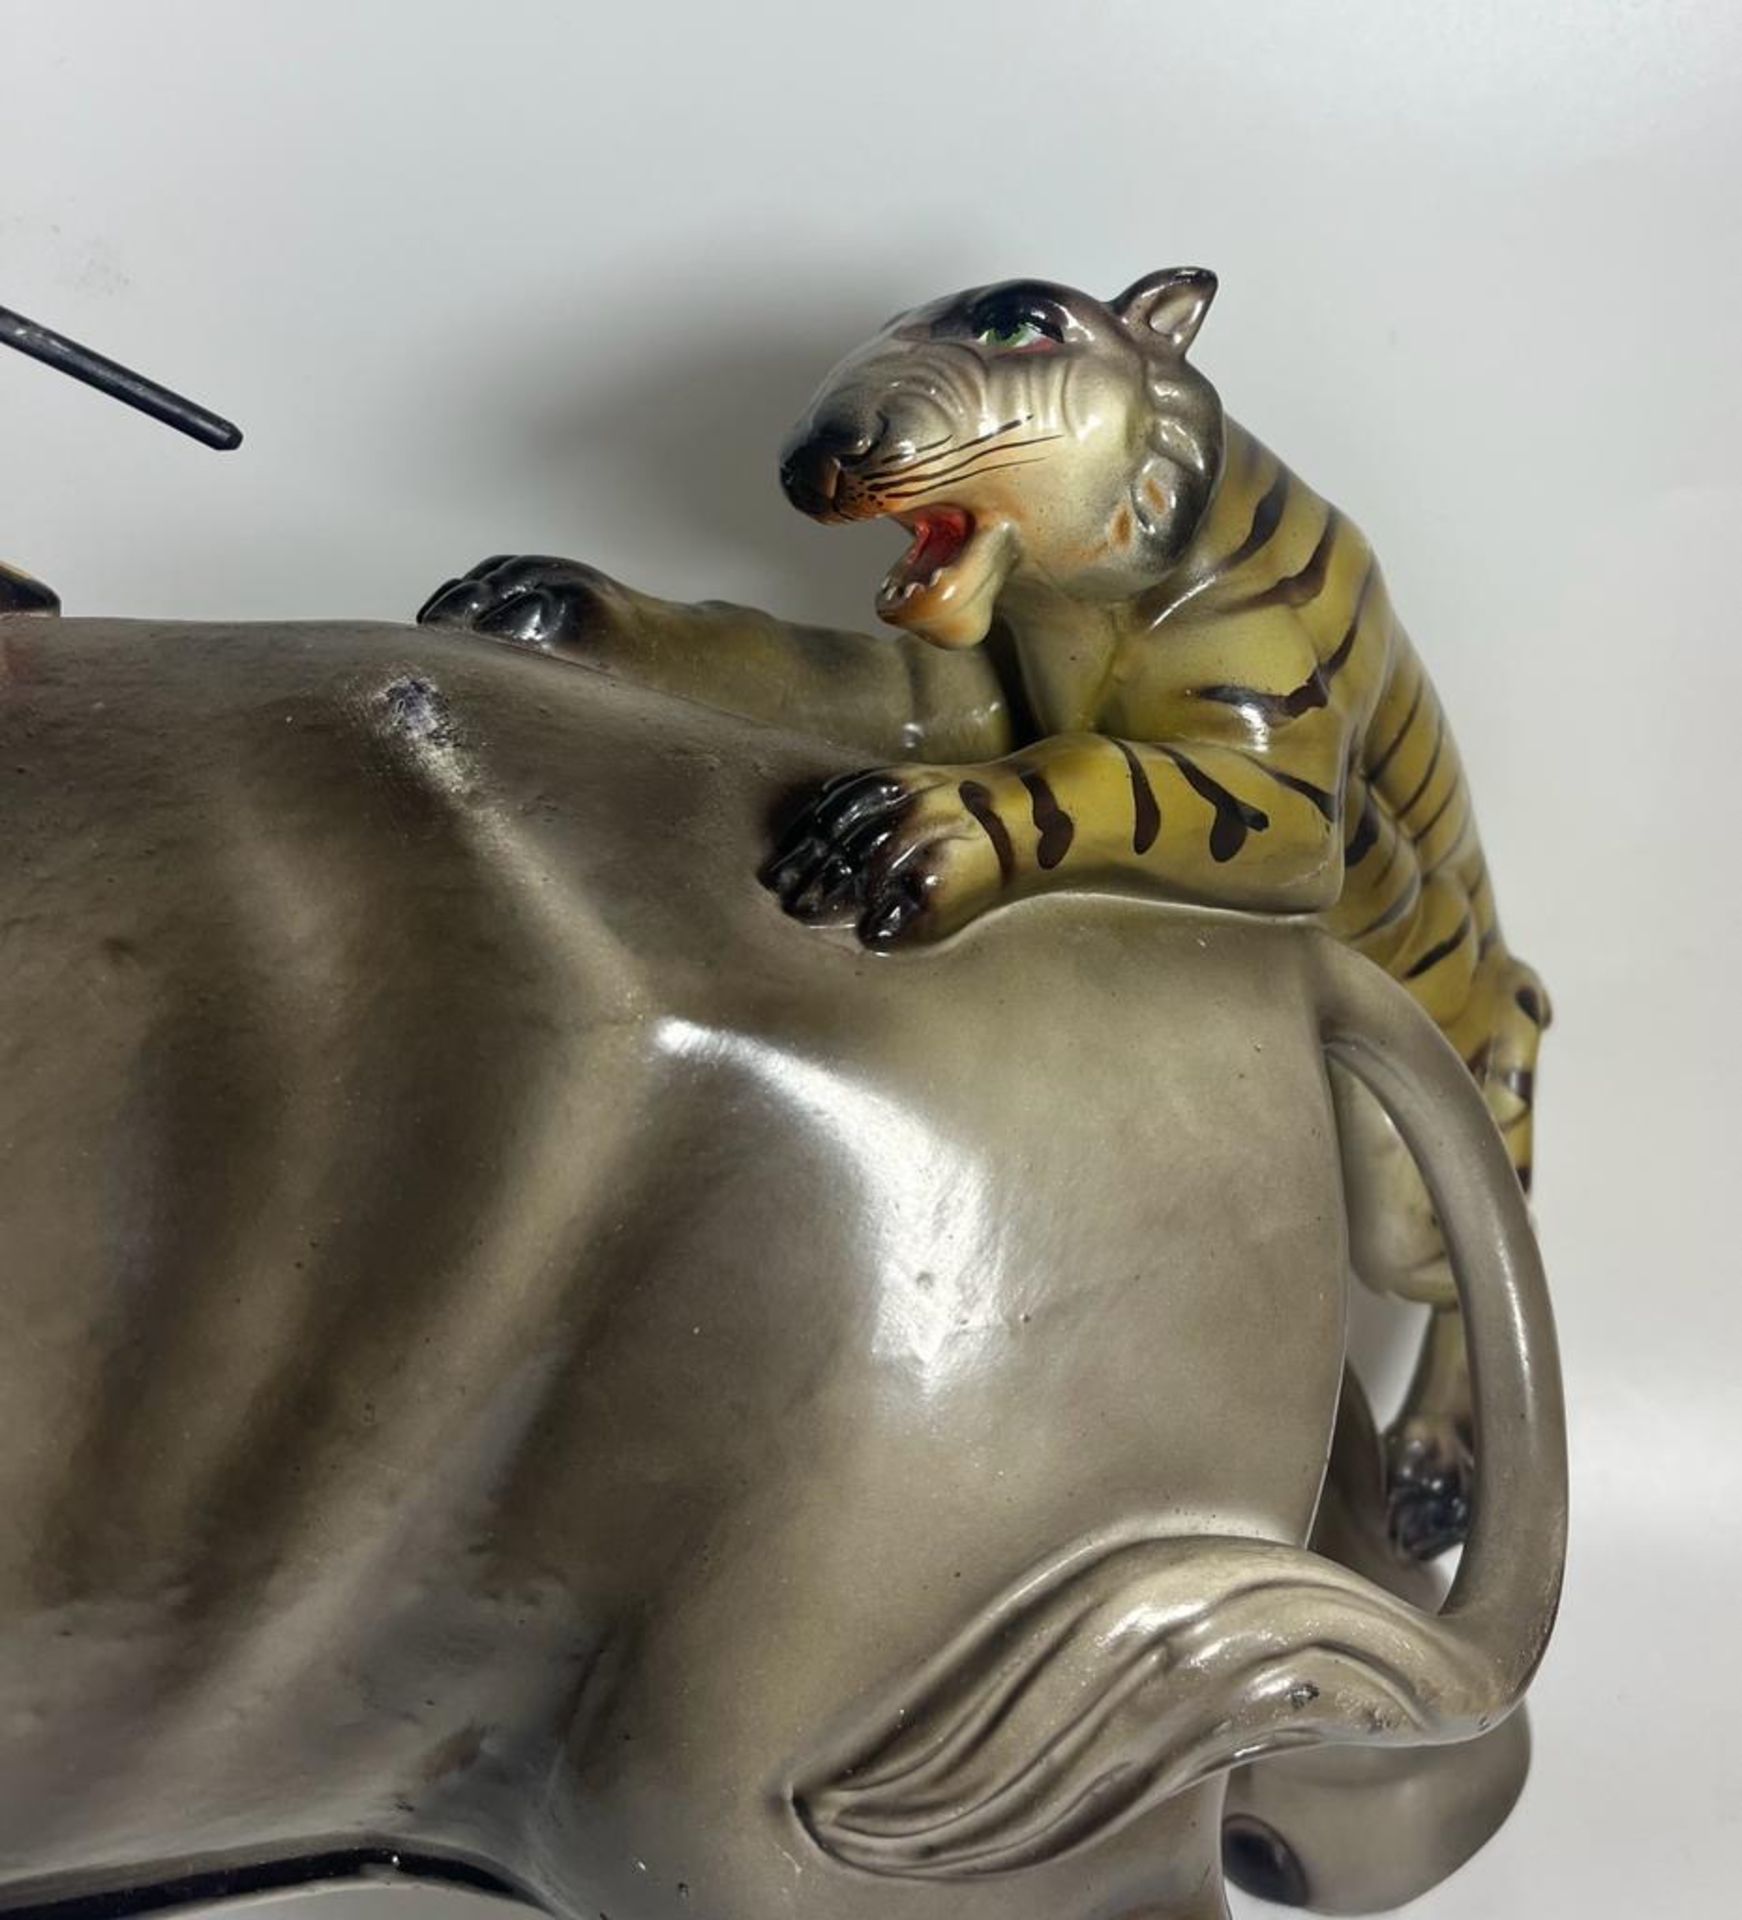 A LARGE 1970S ITALIAN POTTERY SCULPTURE OF AN ELEPHANT BEING ATTACKED BY TIGERS, LENGTH 49 CM - Image 2 of 6